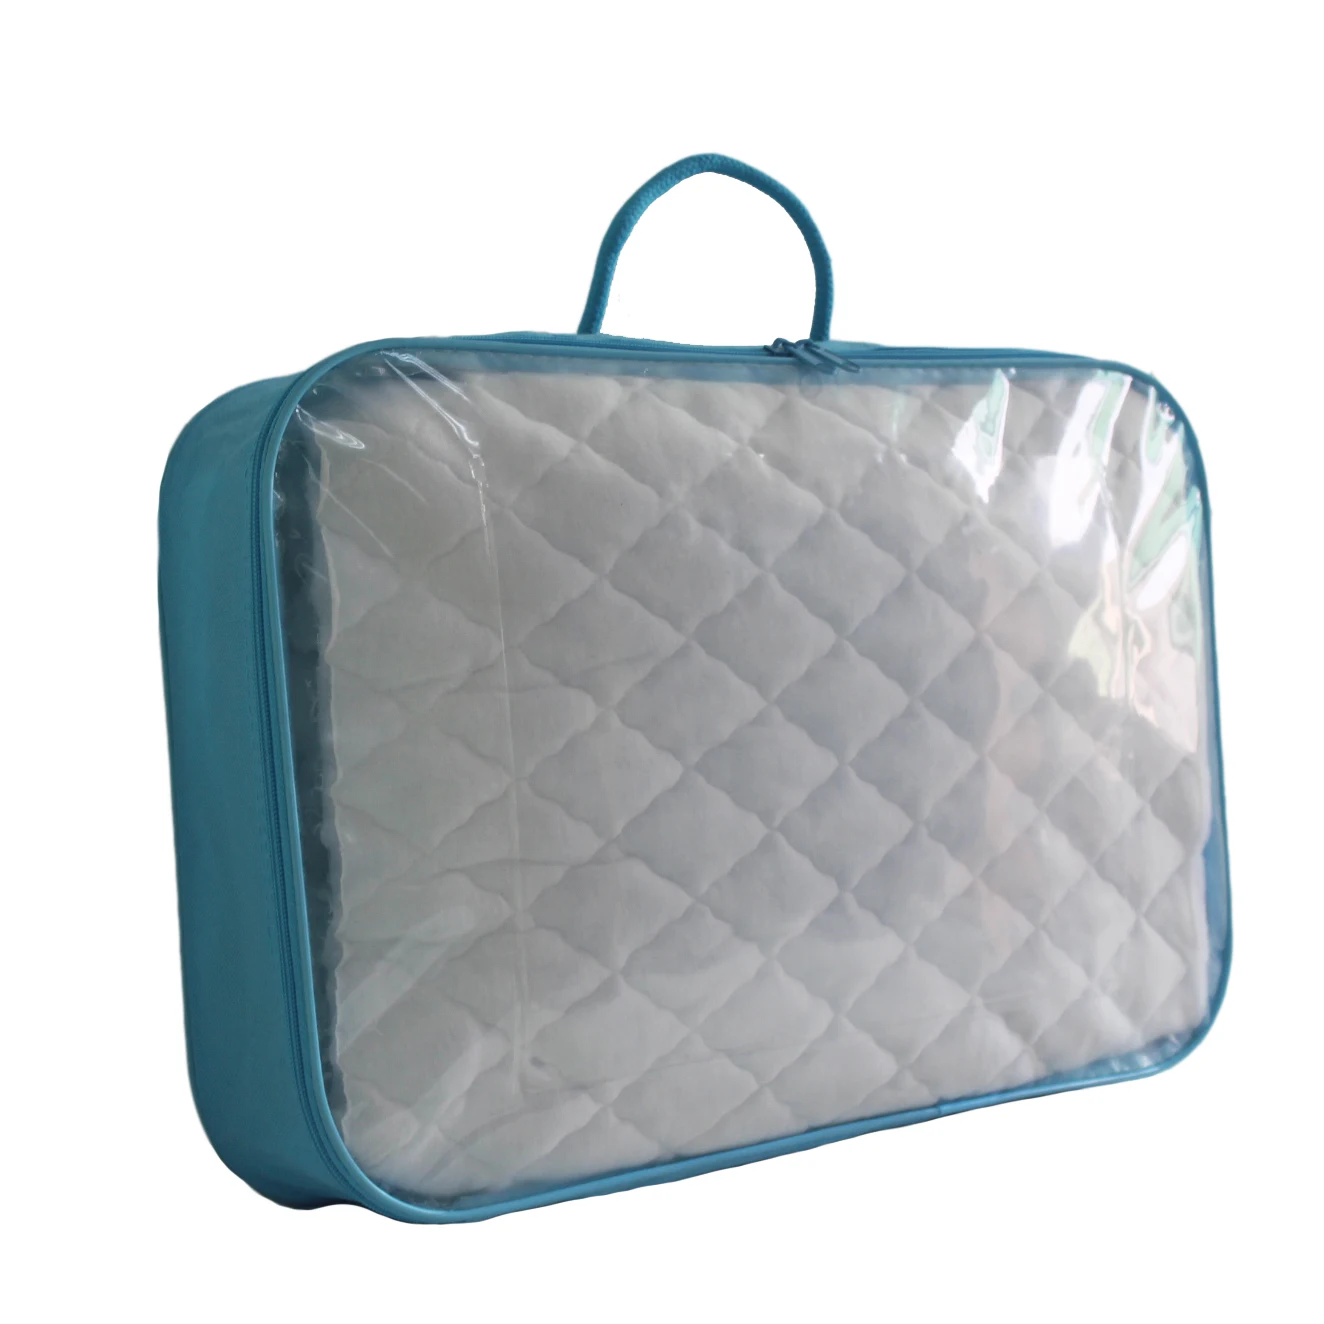 plastic storage bags for luggage